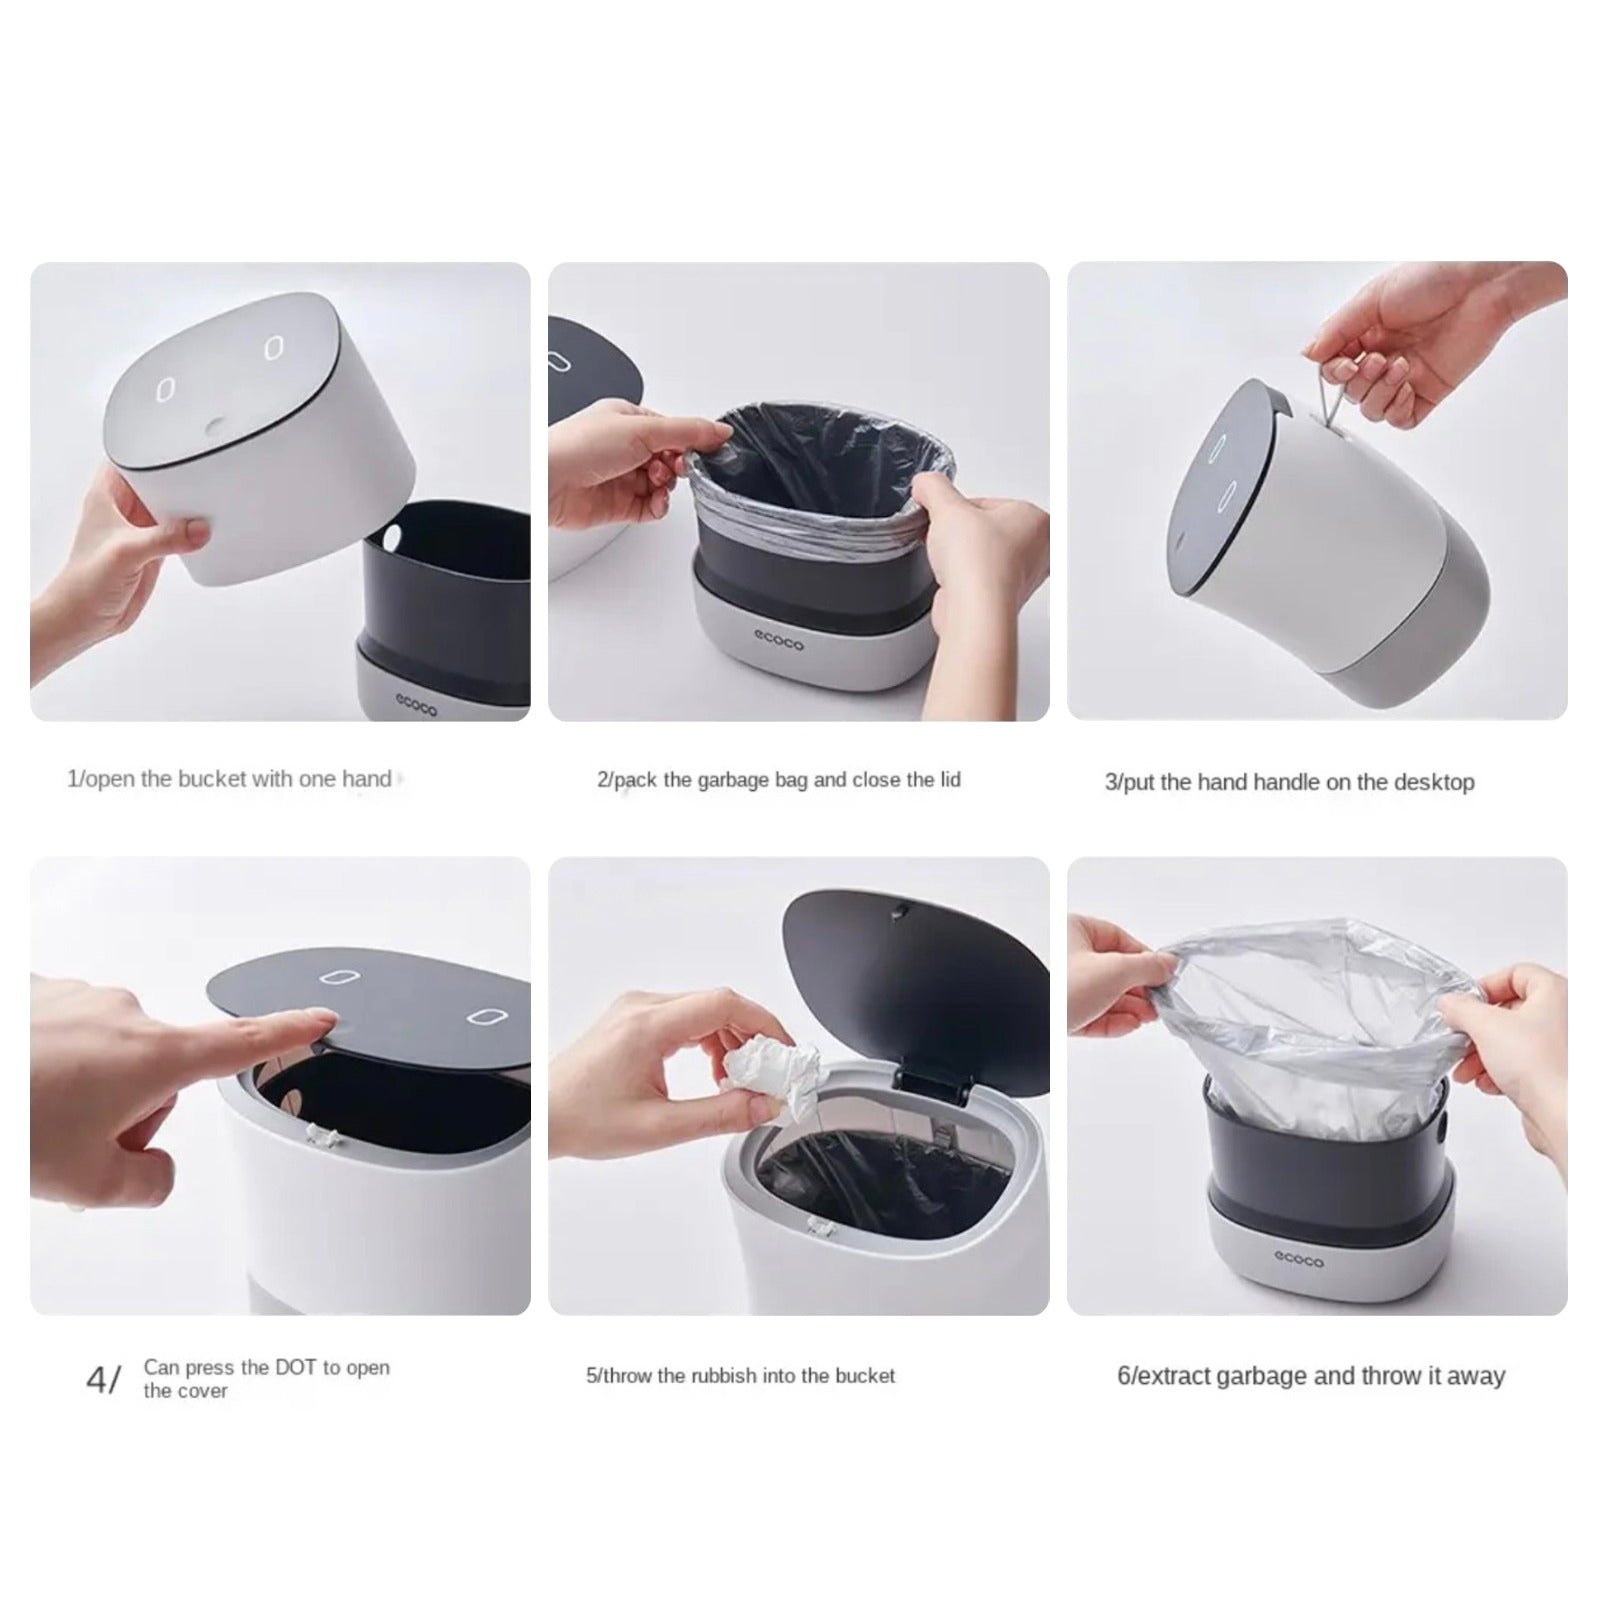 Image showing the instructions to use the Mini Desktop Waste Bin